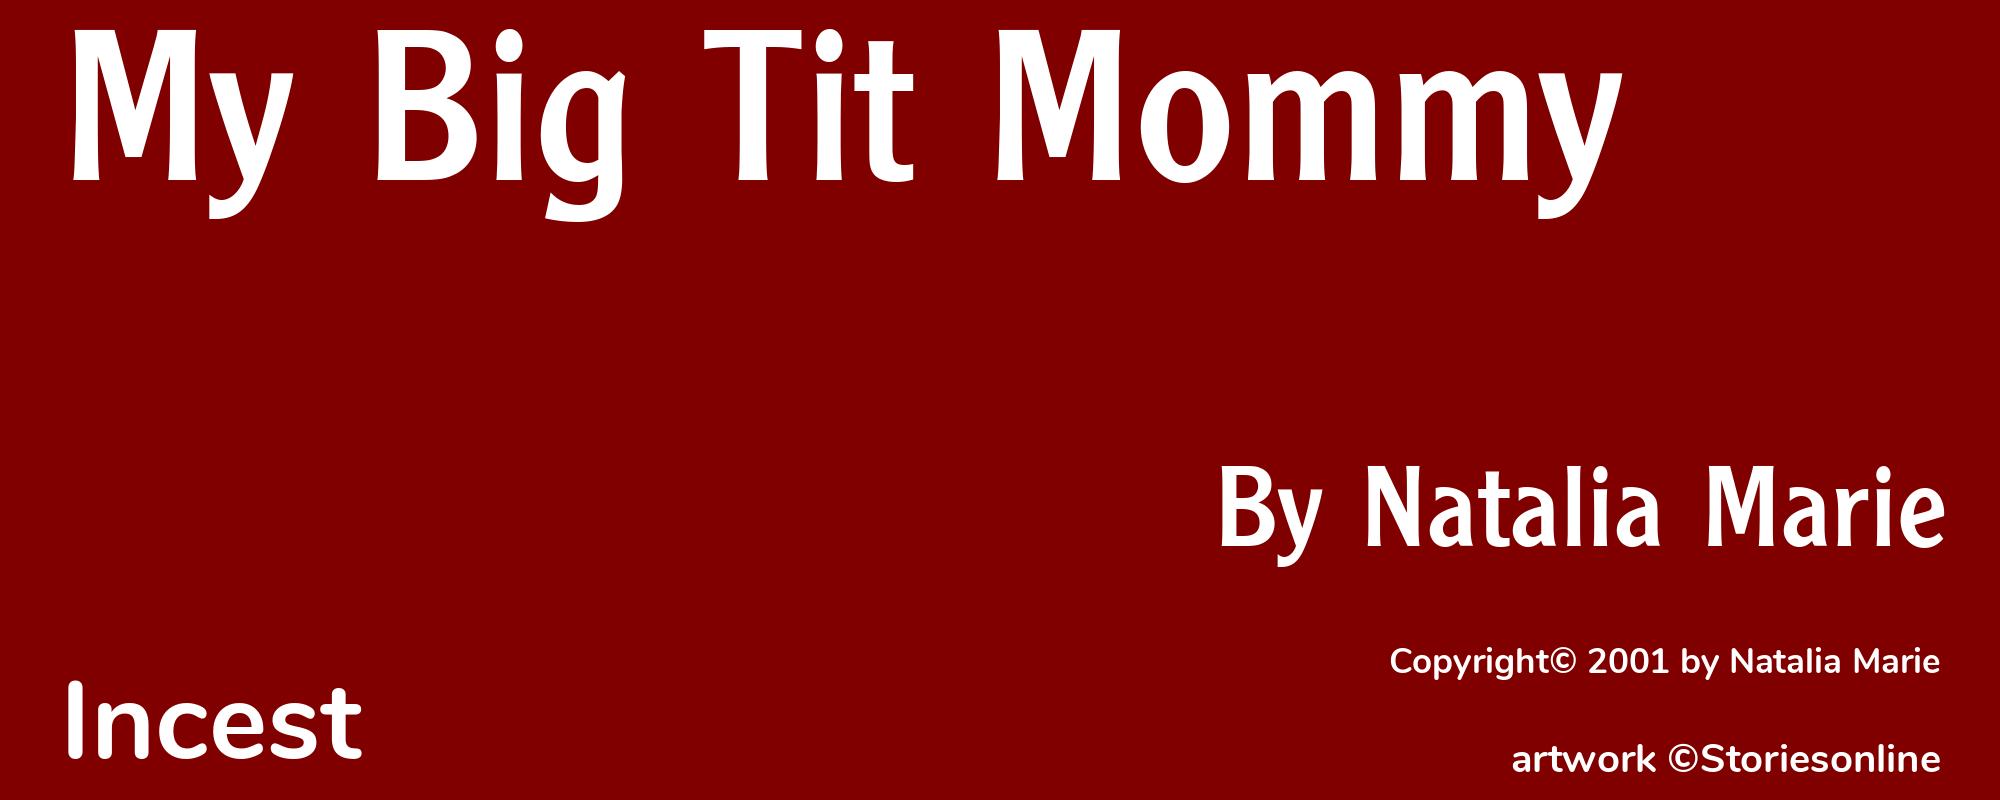 My Big Tit Mommy - Cover